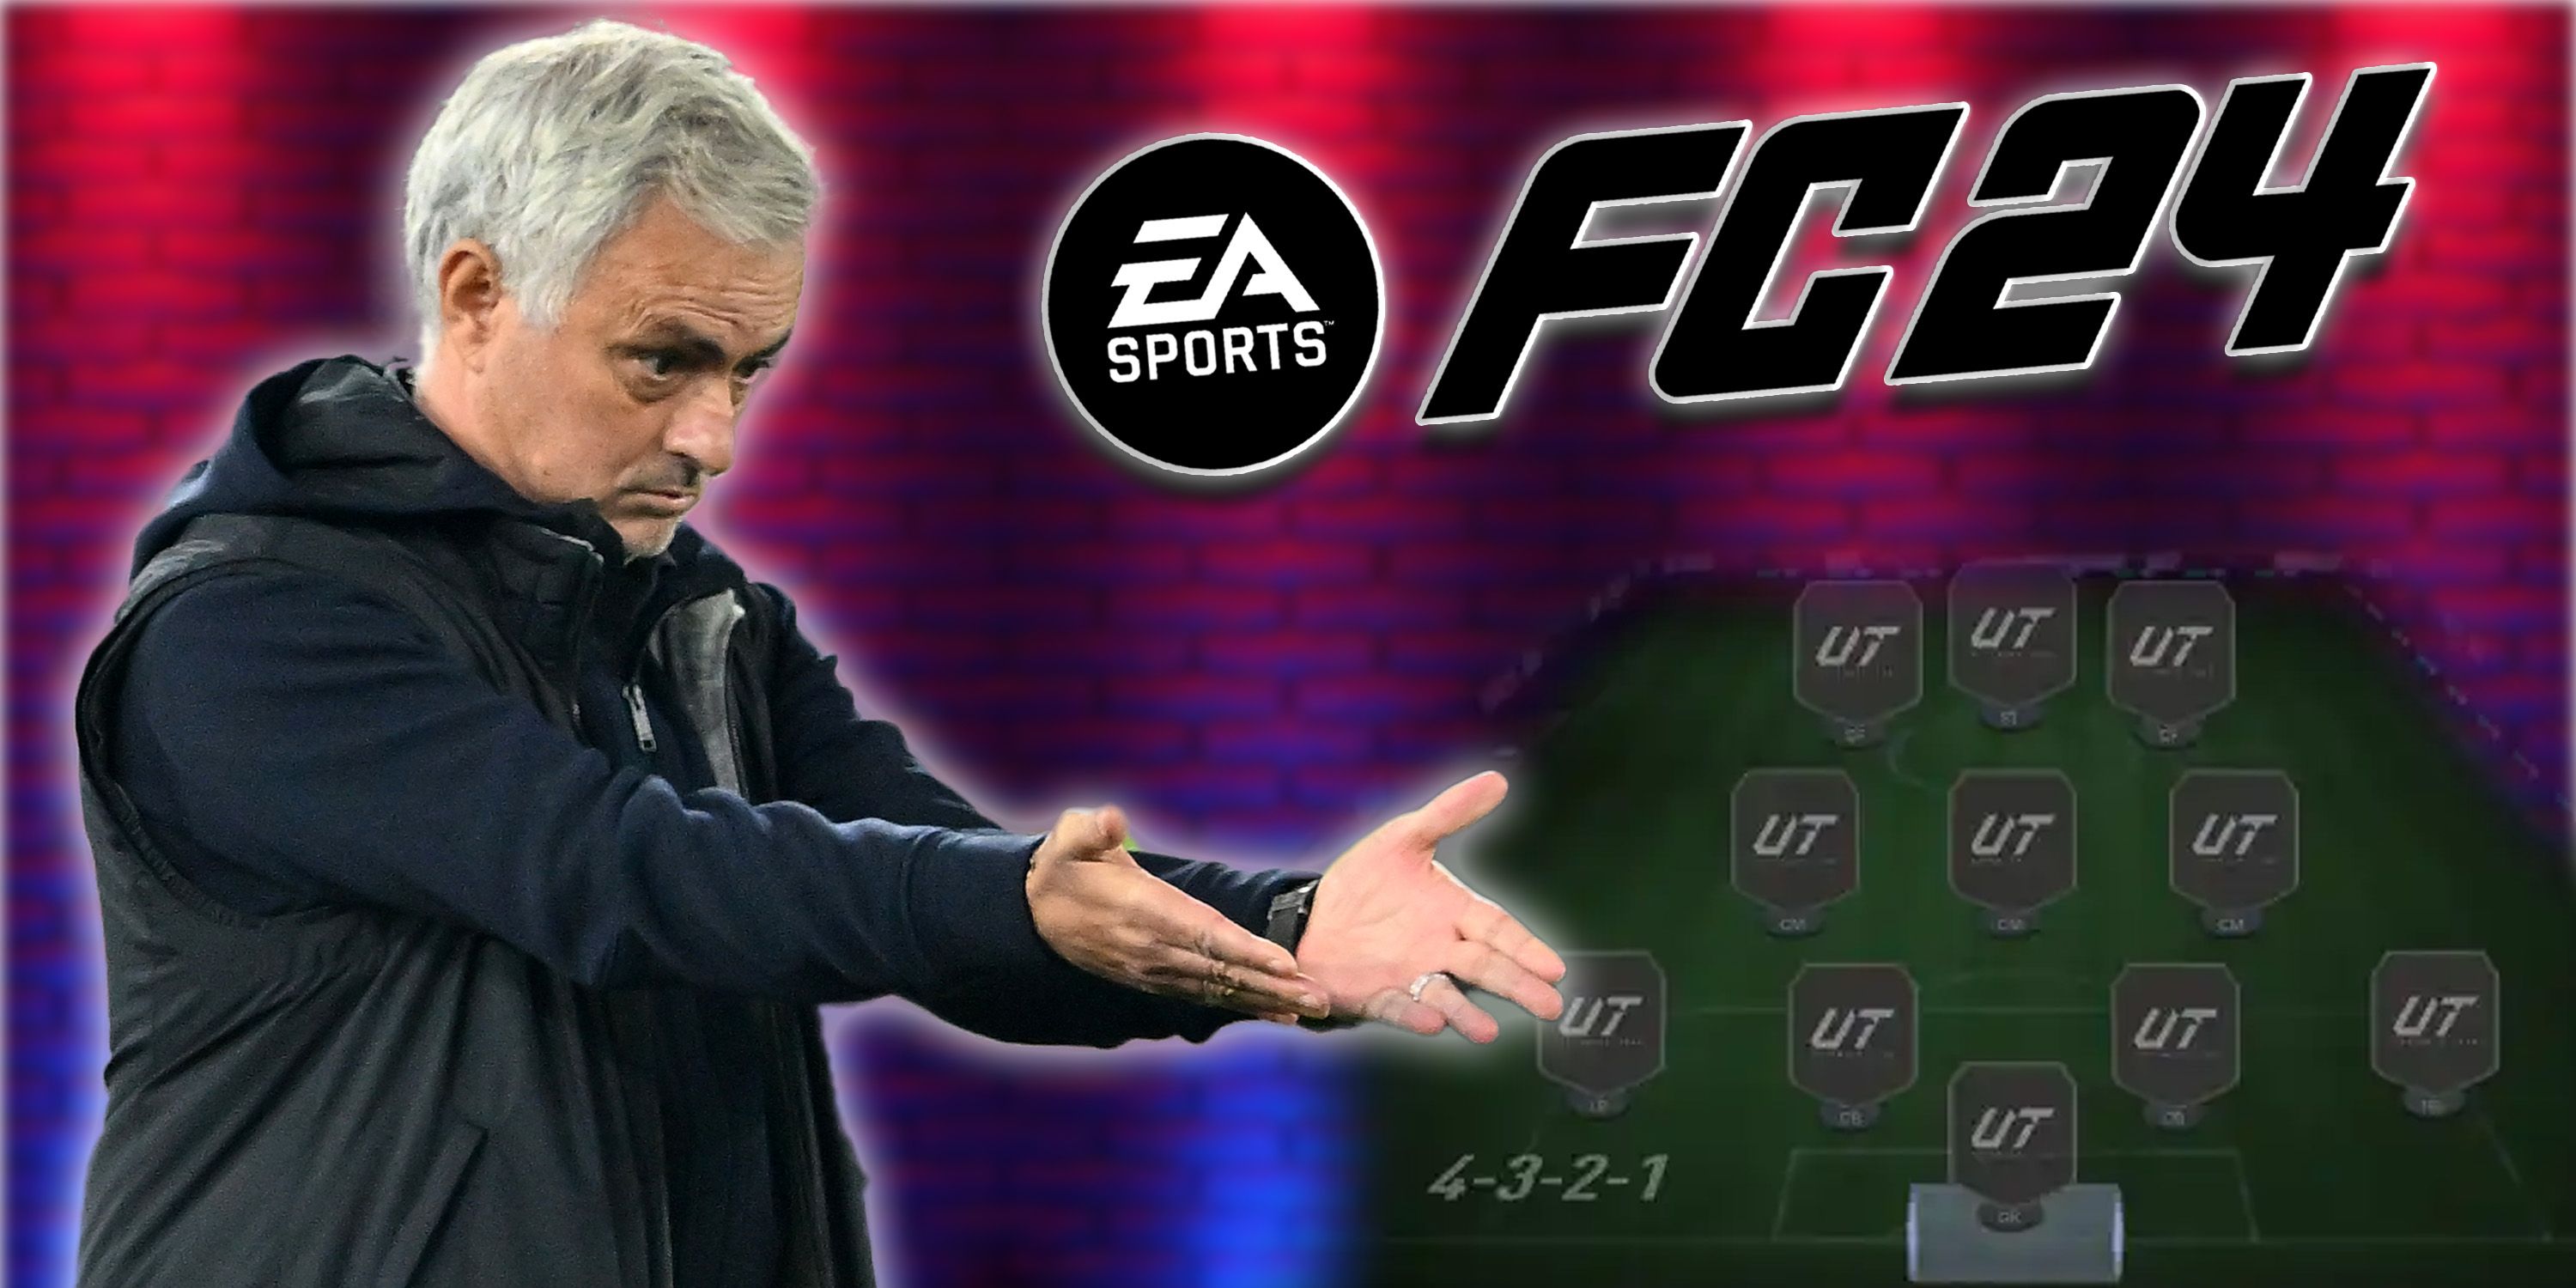 Jose Mourinho and then 4-3-2-1 formation in EA Sports FC 24.